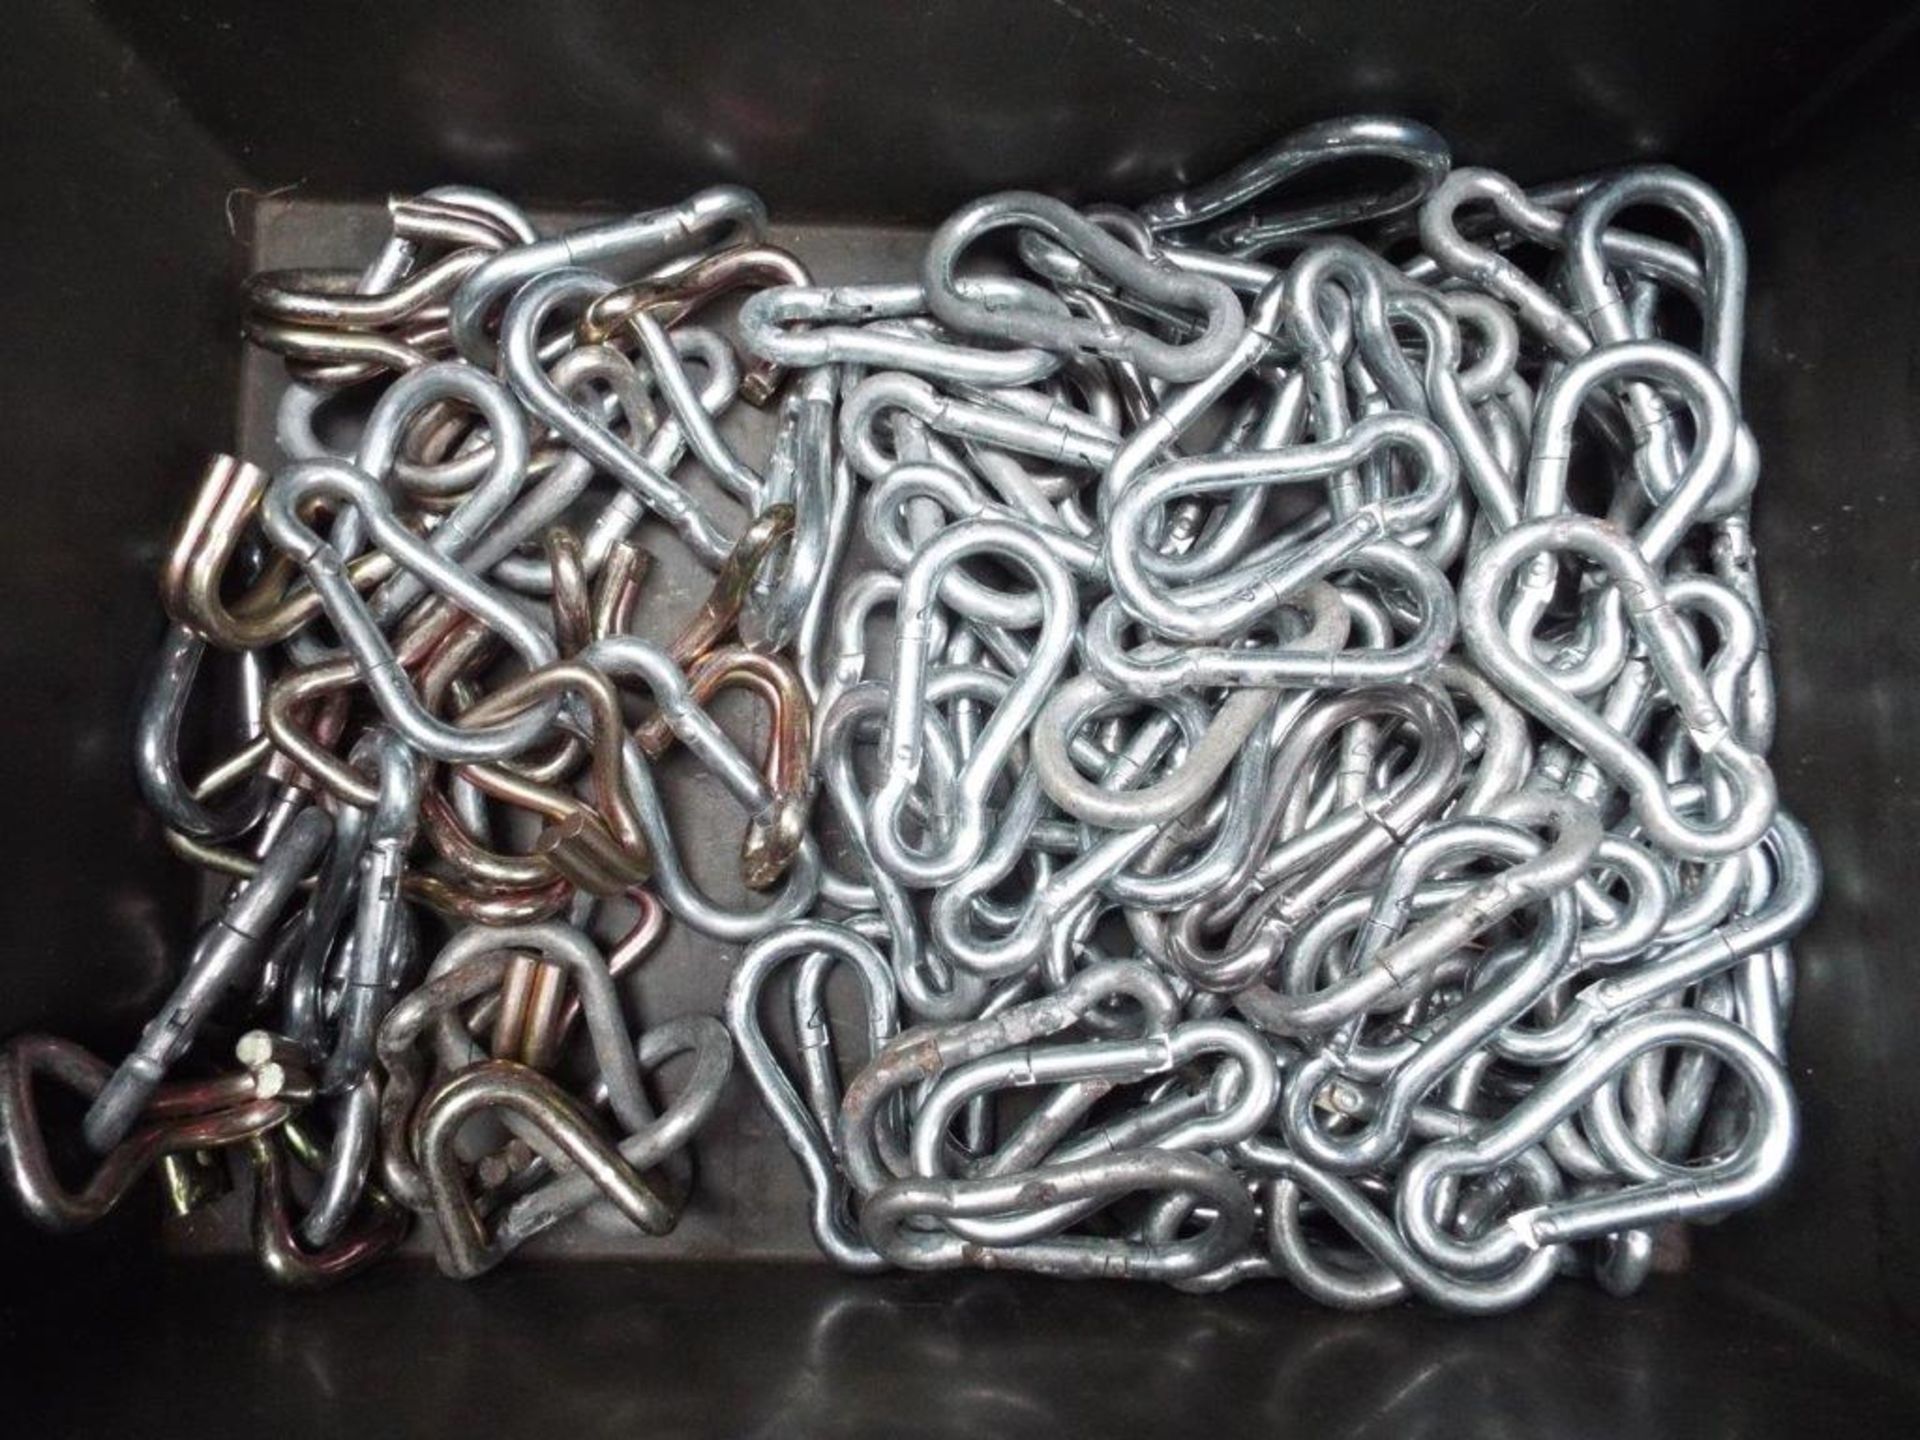 Approximately 100 x Spring Hook Karabiners